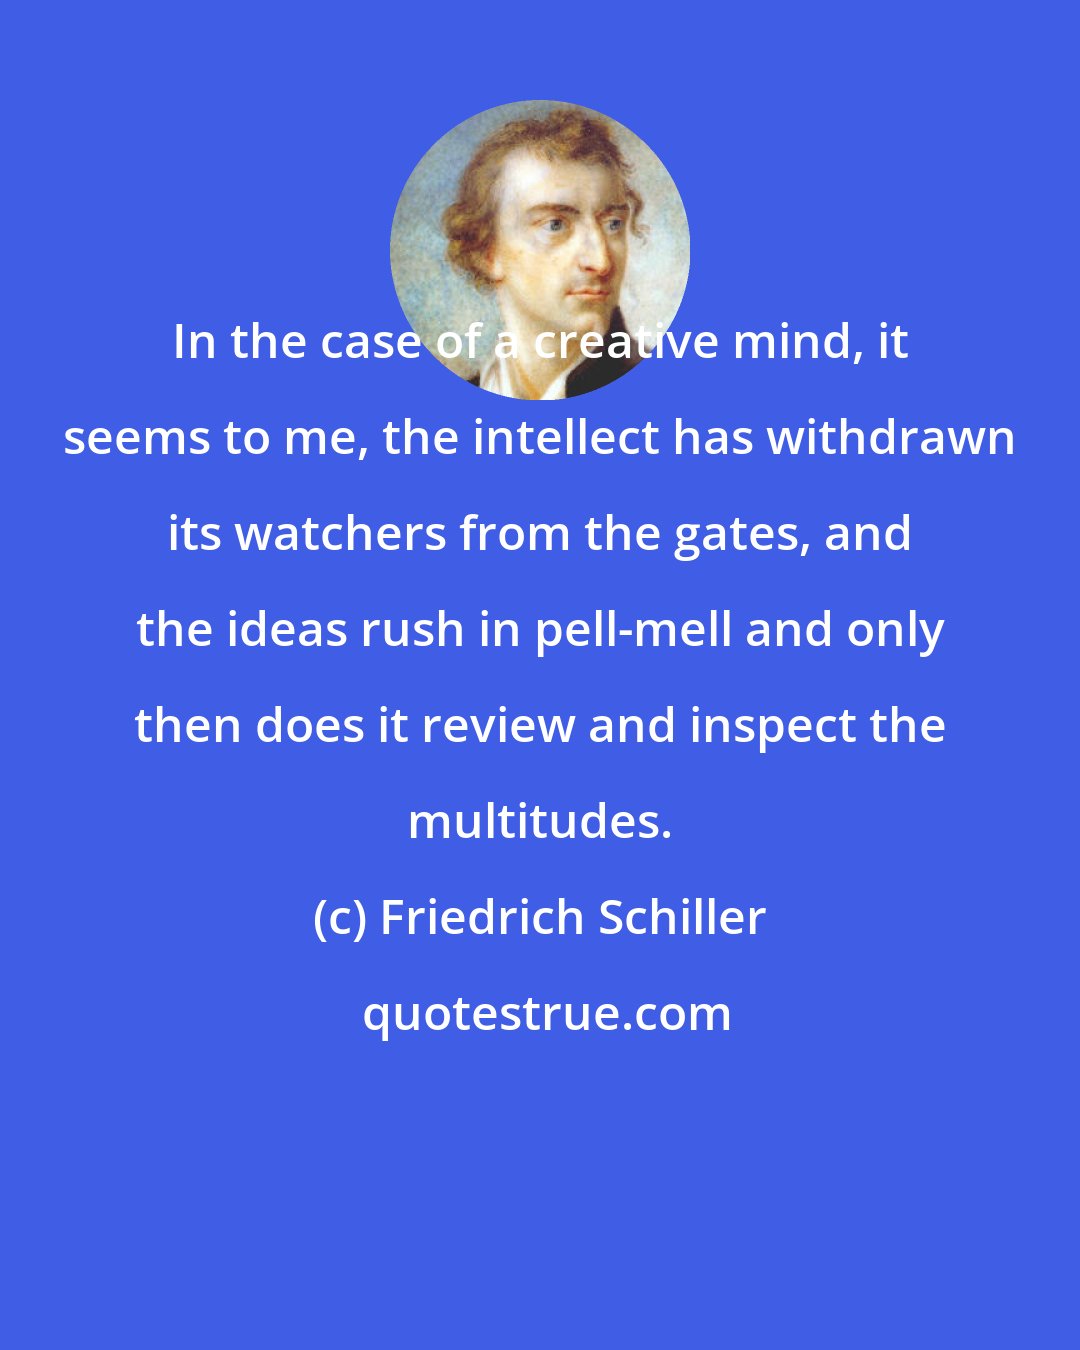 Friedrich Schiller: In the case of a creative mind, it seems to me, the intellect has withdrawn its watchers from the gates, and the ideas rush in pell-mell and only then does it review and inspect the multitudes.